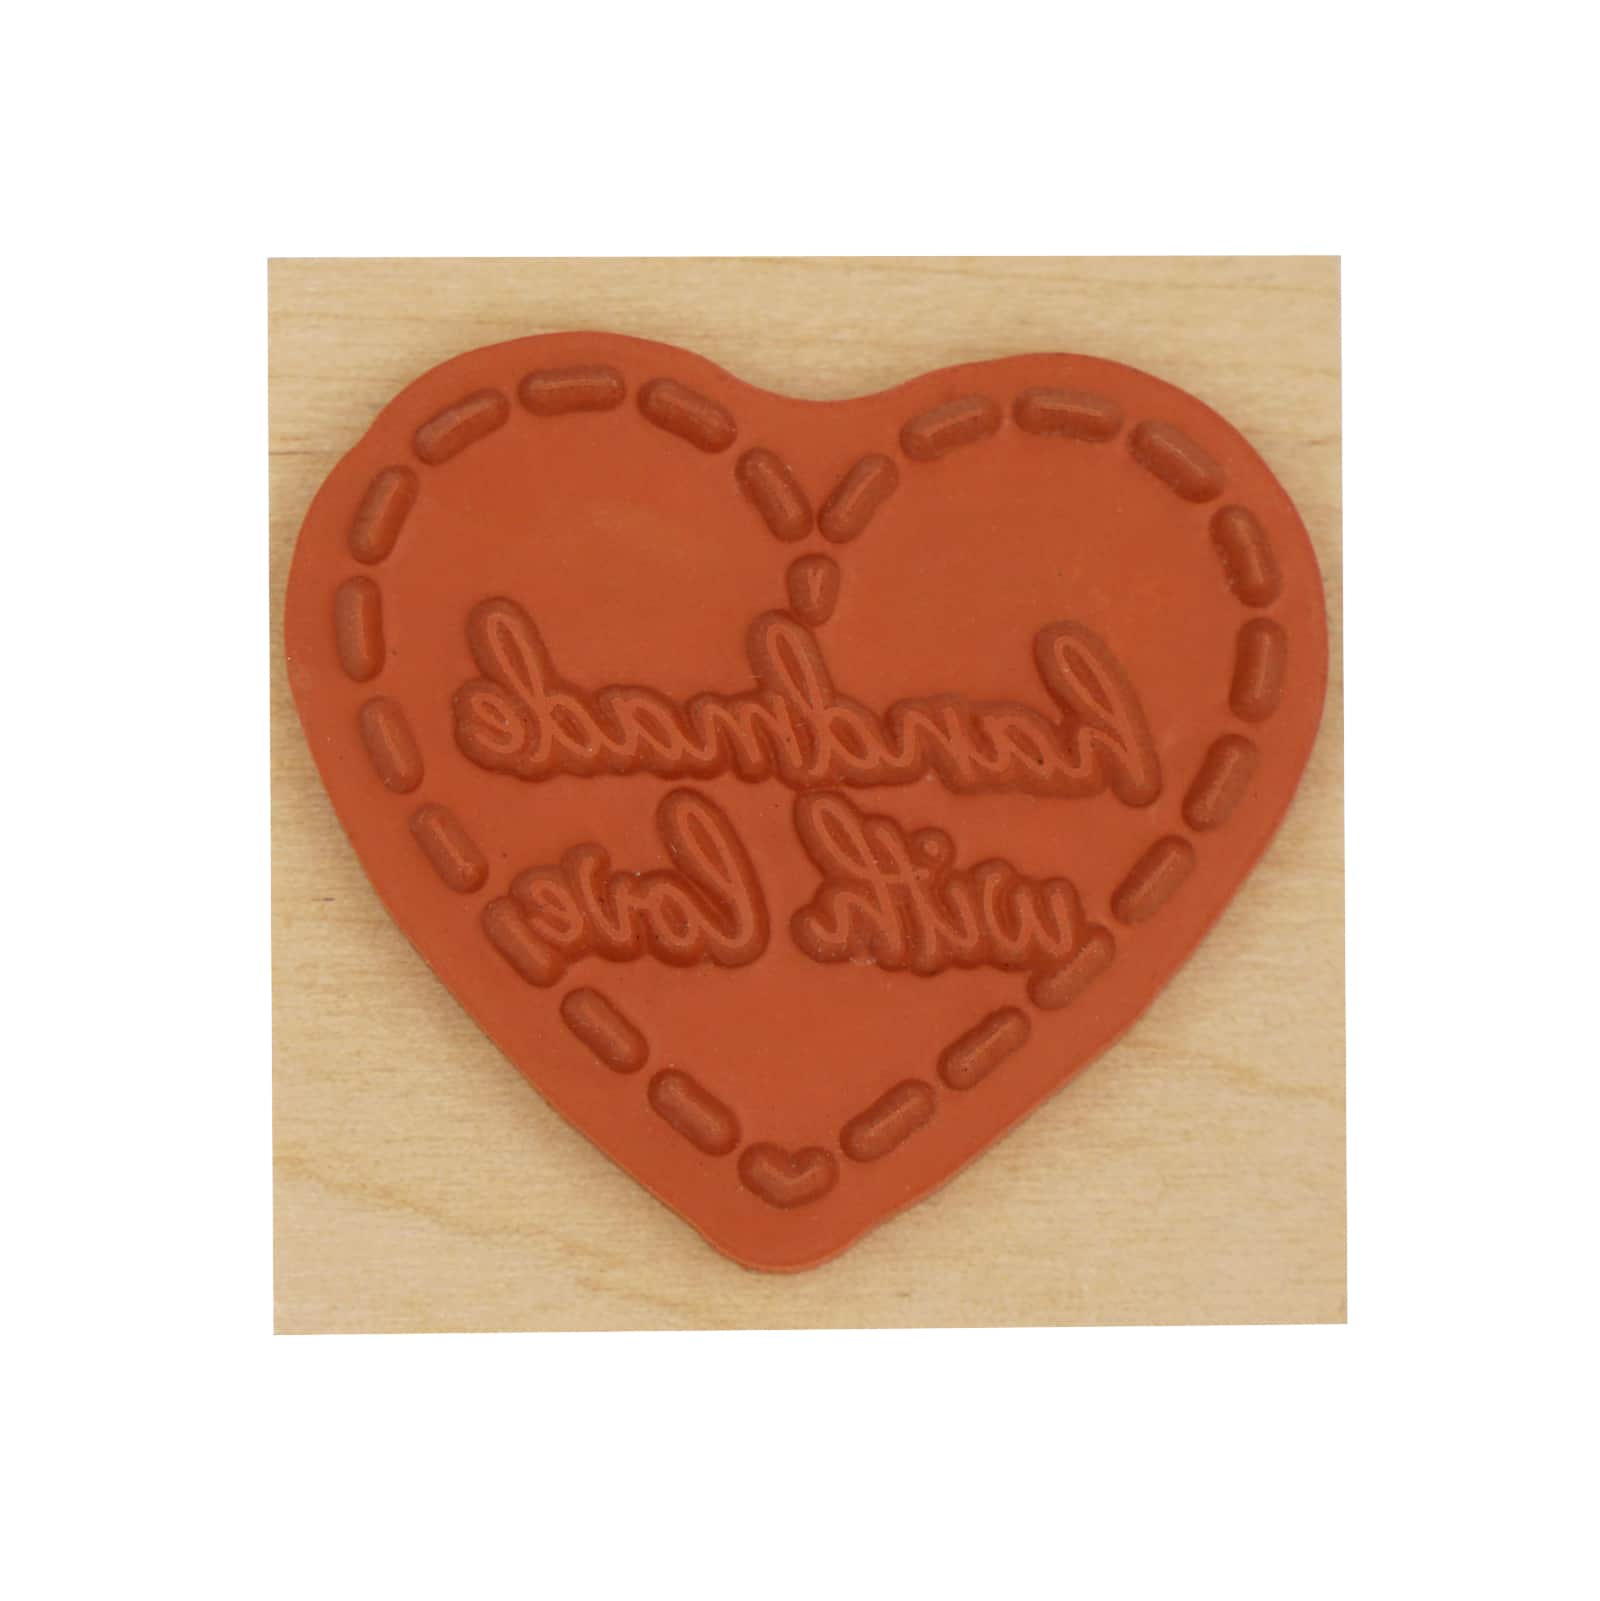 Handmade with Love Wood Stamp by Recollections&#x2122;